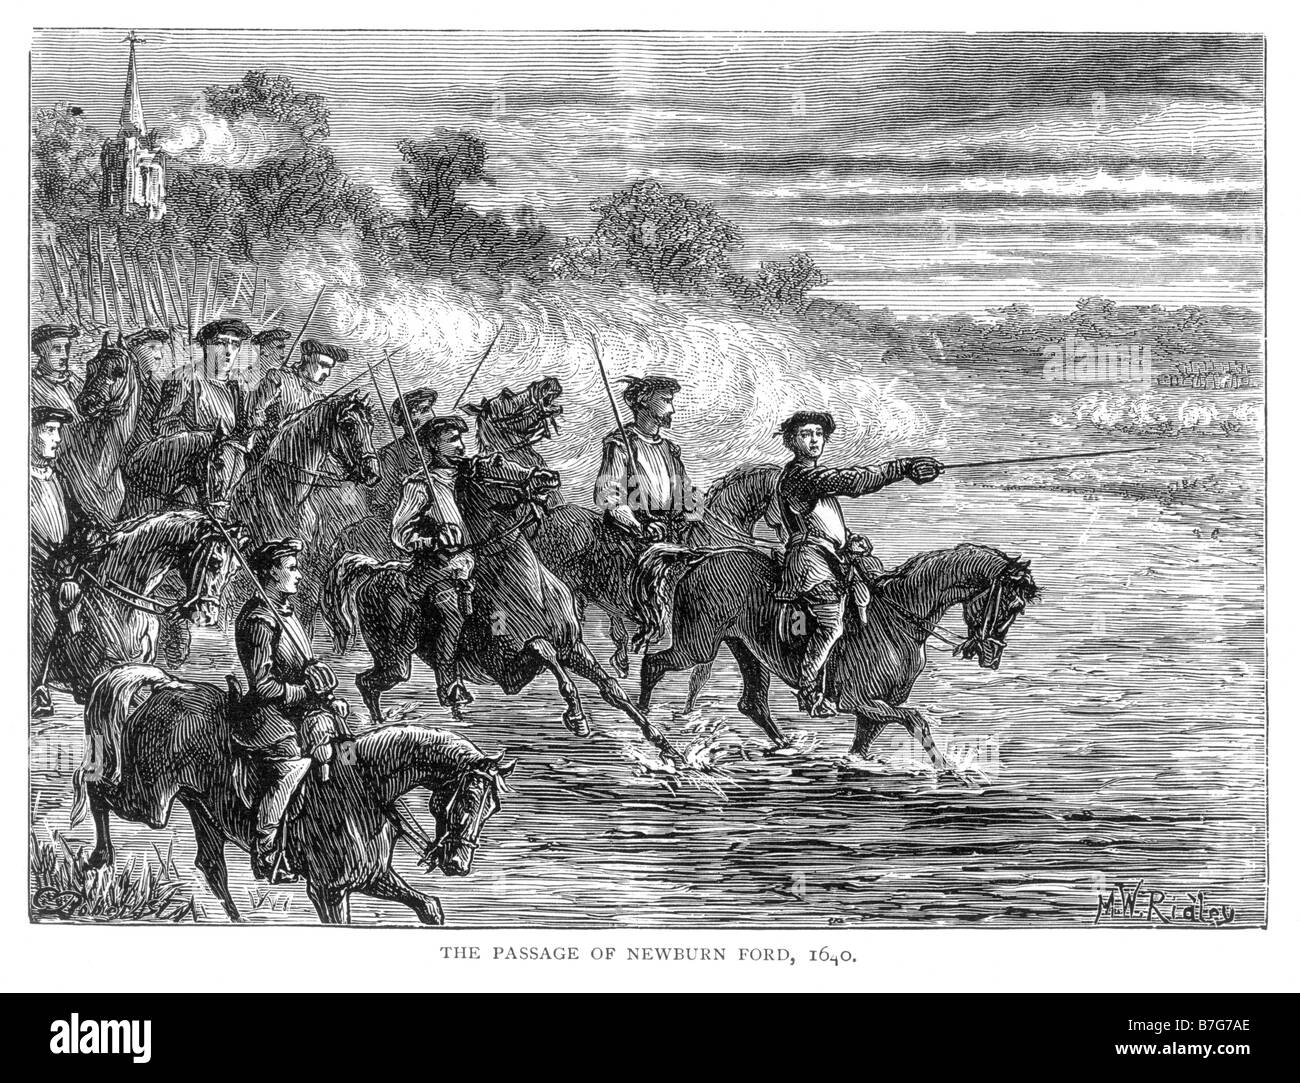 The Passage of Newburn Ford 1640 Battle of Newburn Illustration. The Scots crossing the River Tyne at Newburn Ford, August 1640. Stock Photo